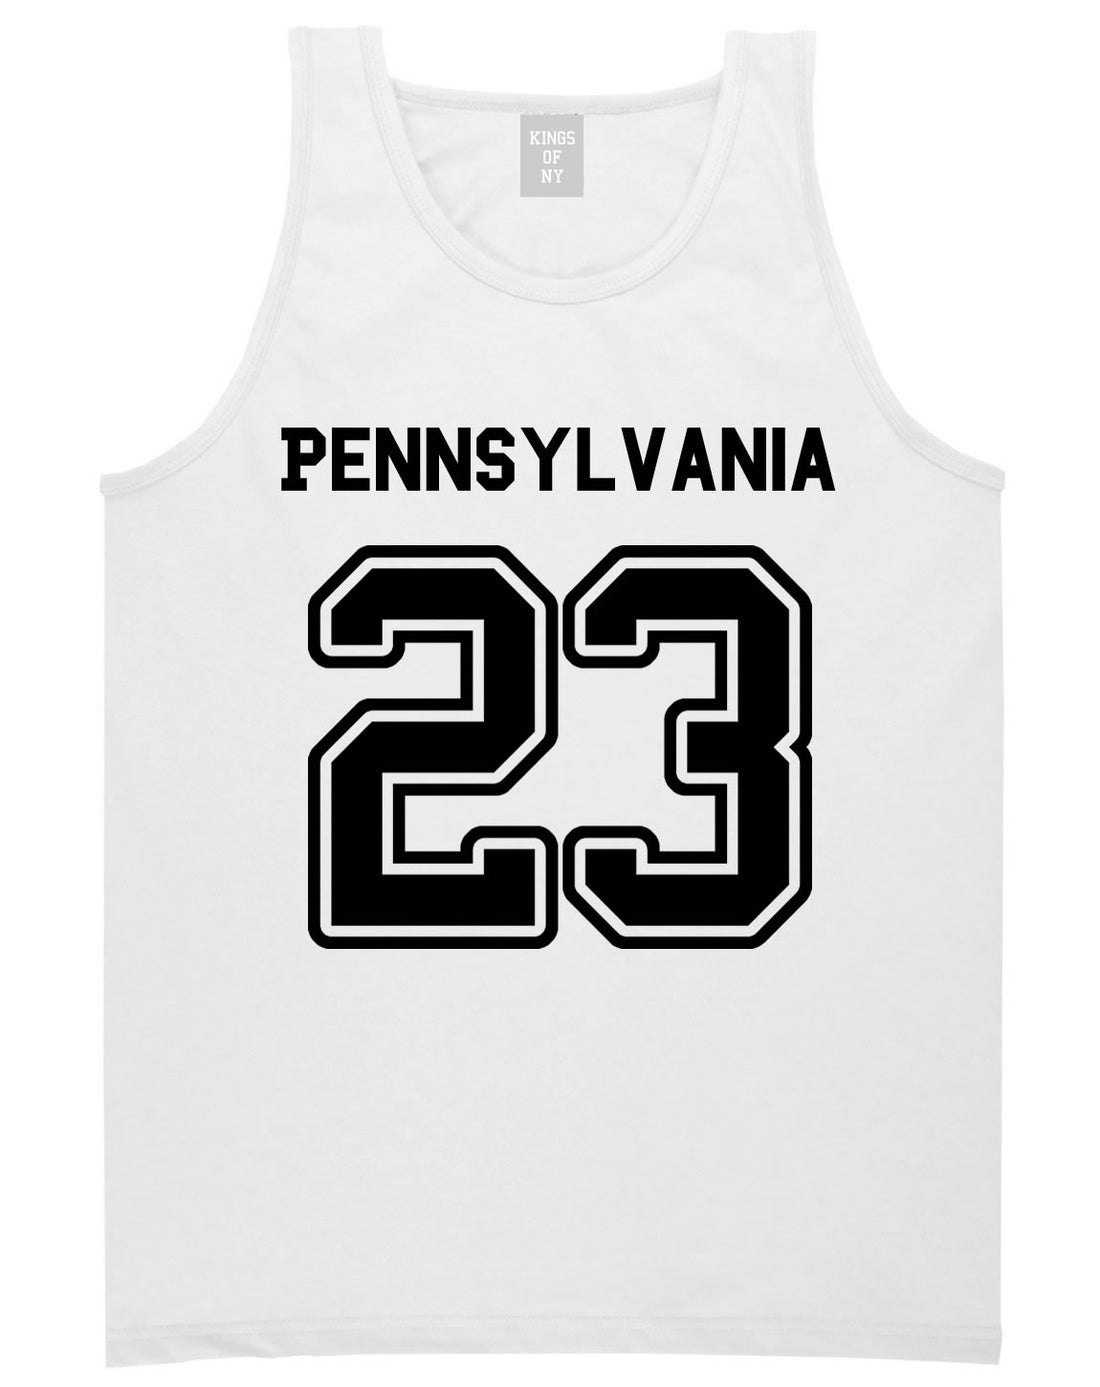 Sport Style Pennsylvania 23 Team State Jersey Mens Tank Top By Kings Of NY